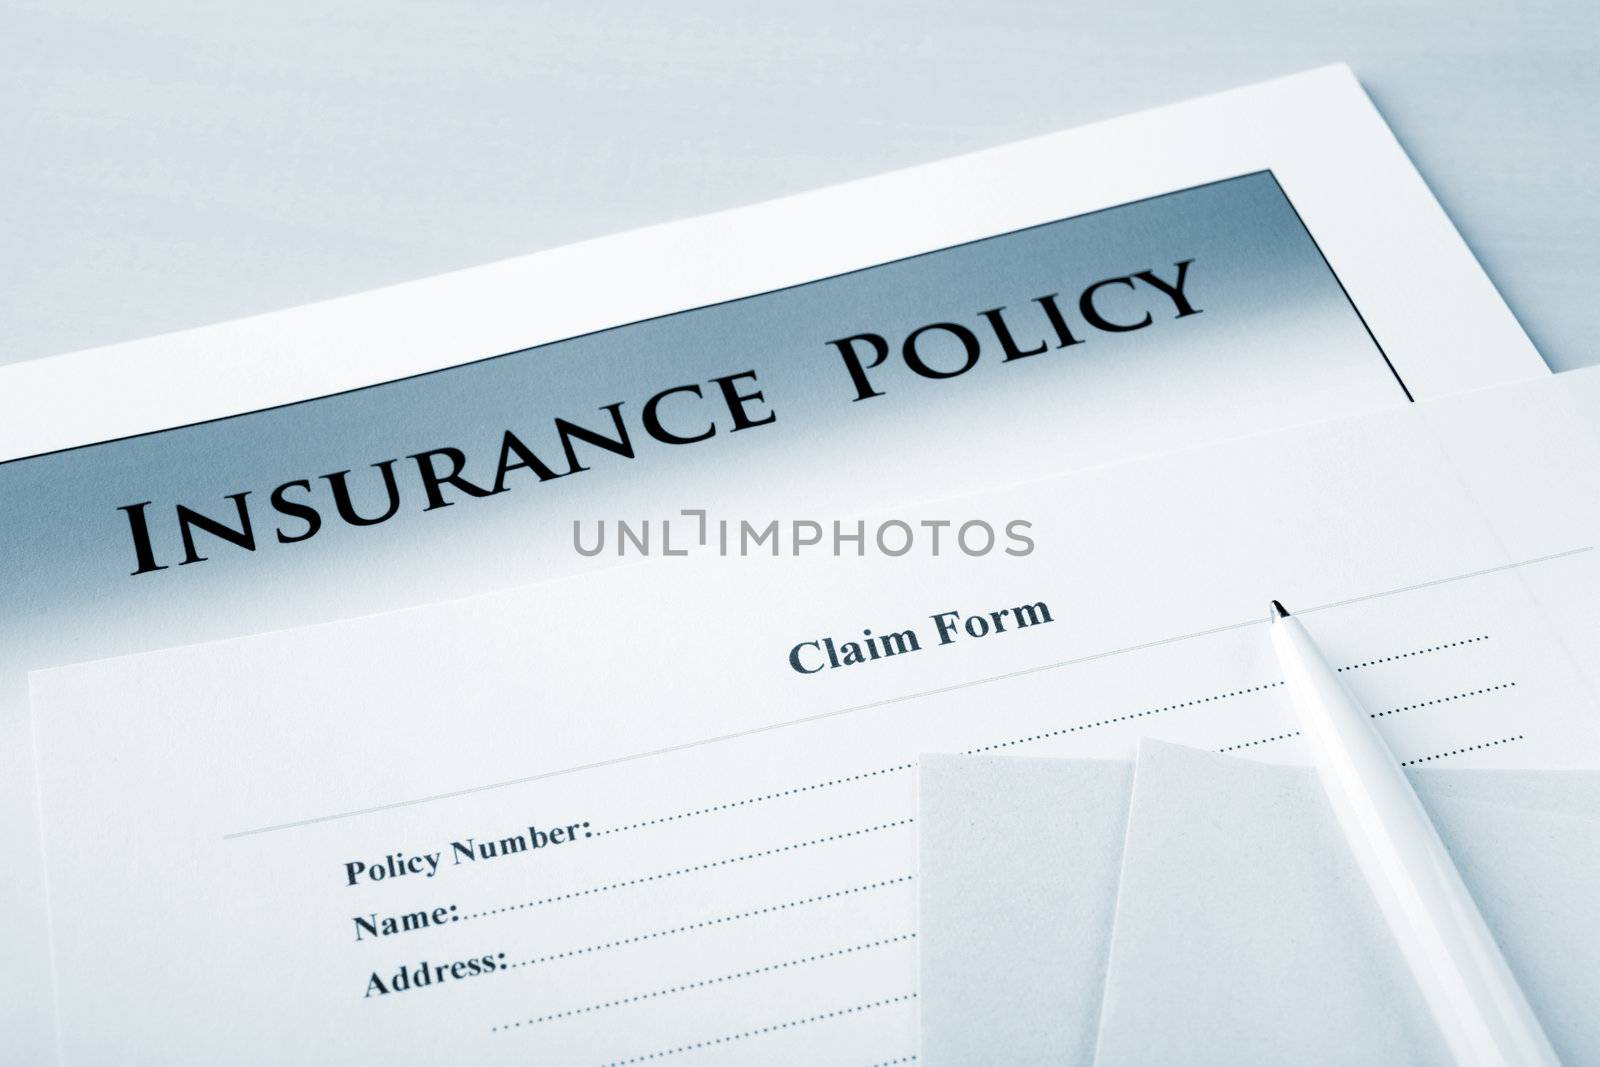 Insurance Policy and Claim Form by Travelling-light